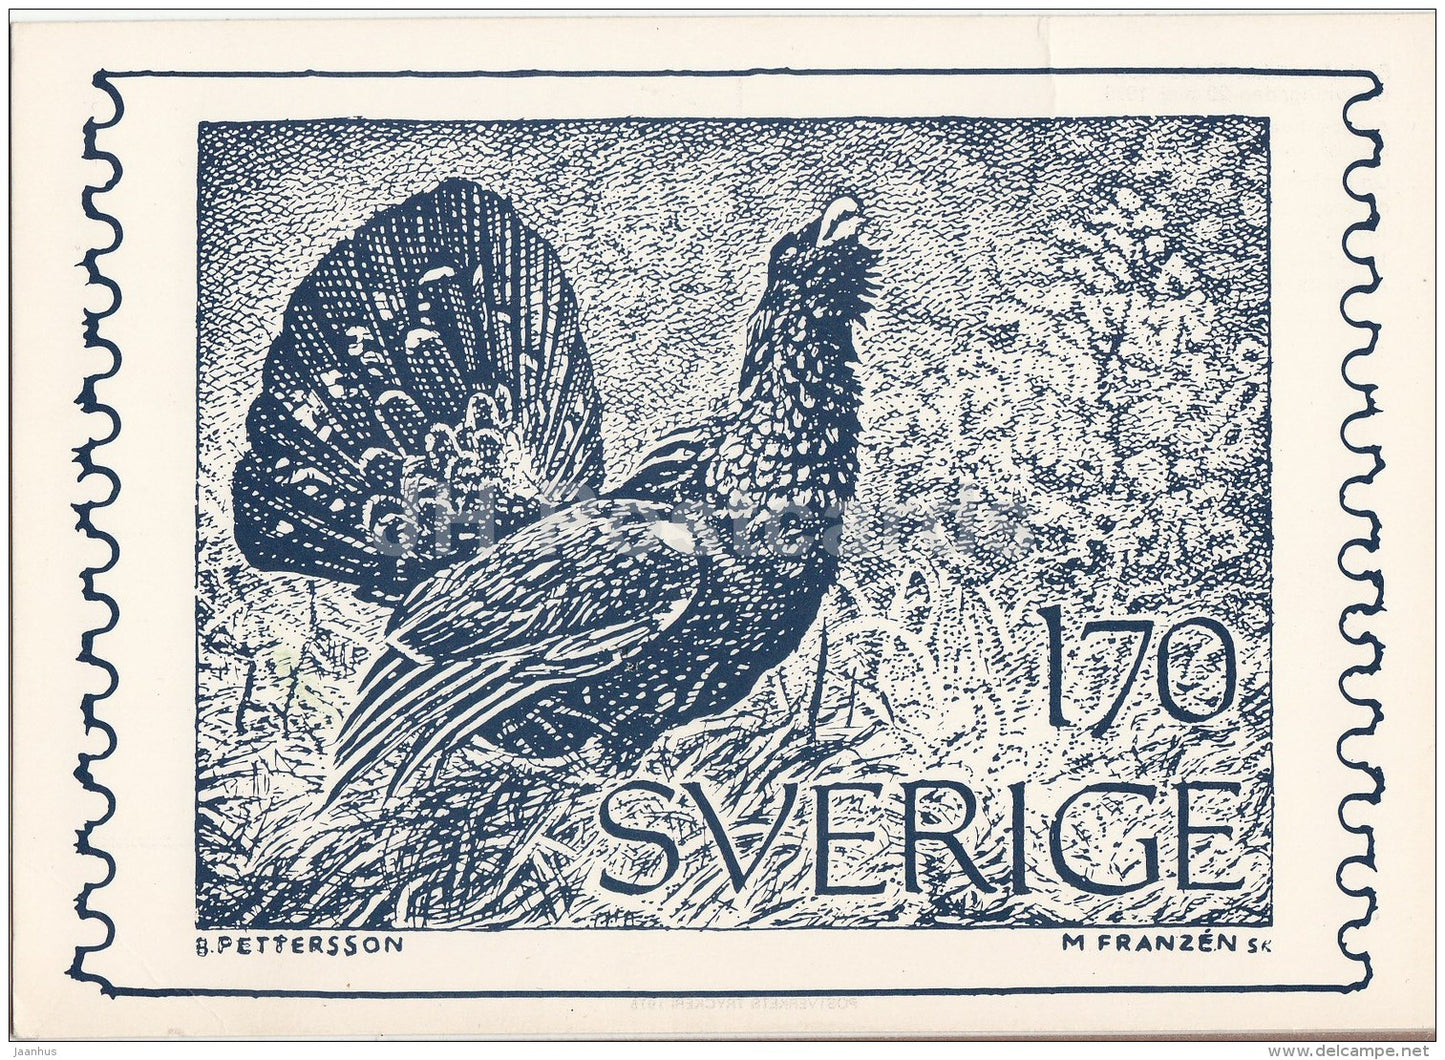 a definitive stamp with a cock of the woods as motif - Western capercaillie - 1975 - Sweden - unused - JH Postcards